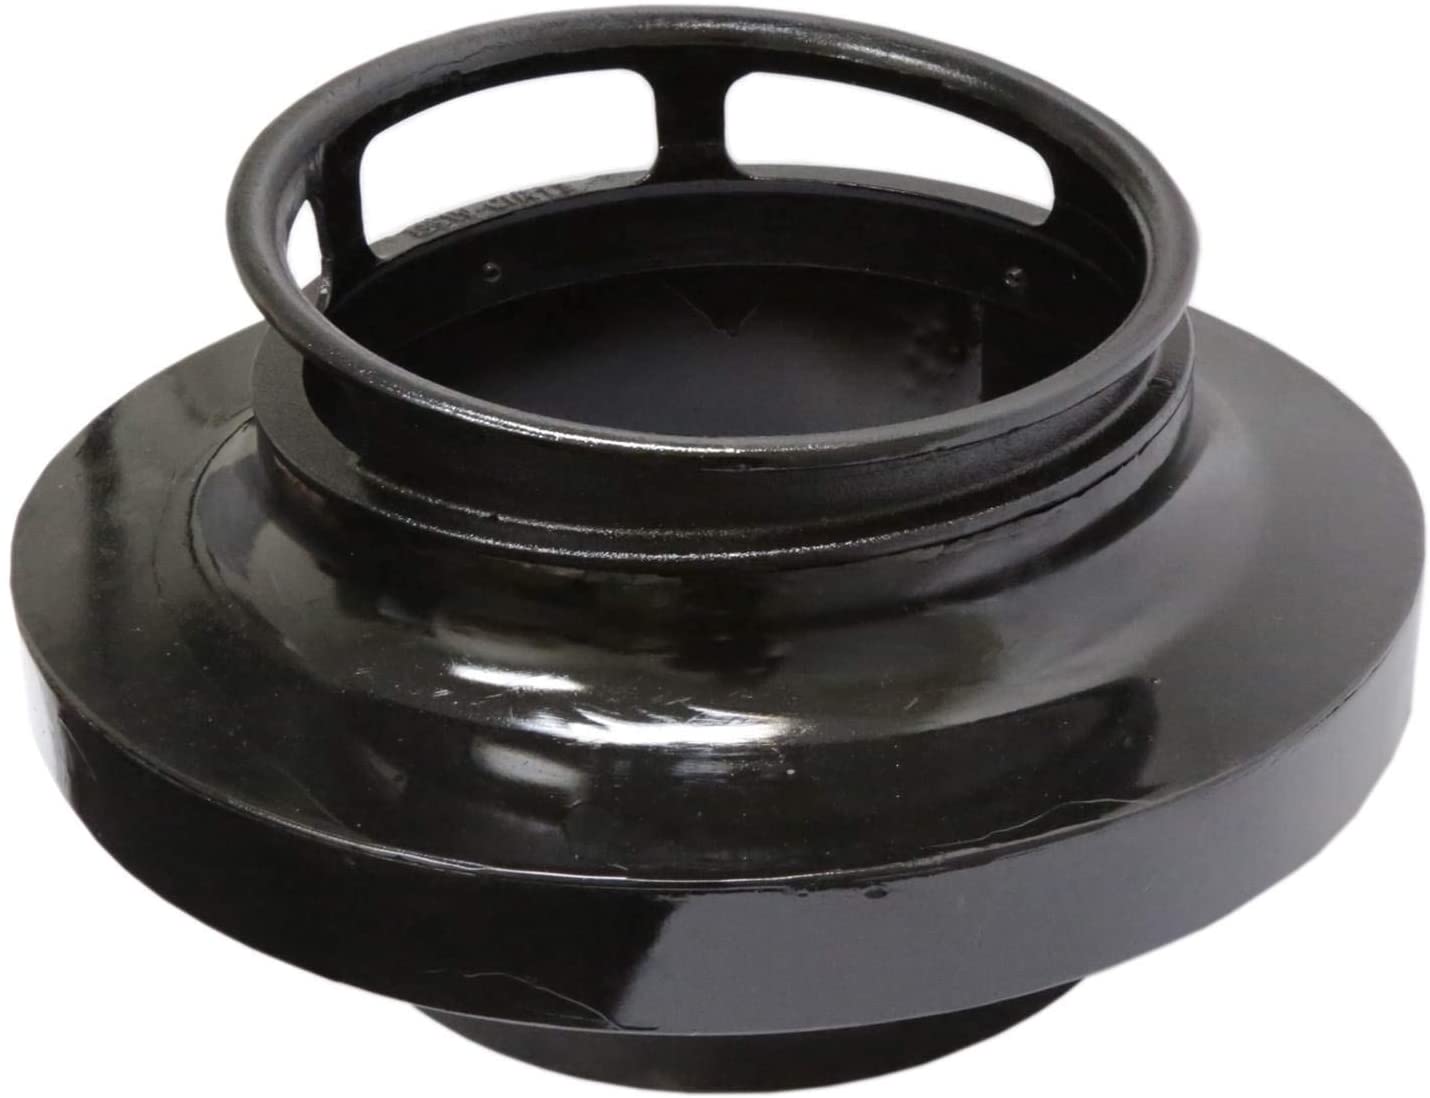 Leyso Chinese Wok Range Custom Made Adapter/Reducer with 13-Inch Cast Iron Rim - Convert The Large Wok Well to Smaller Size (16" to 13")